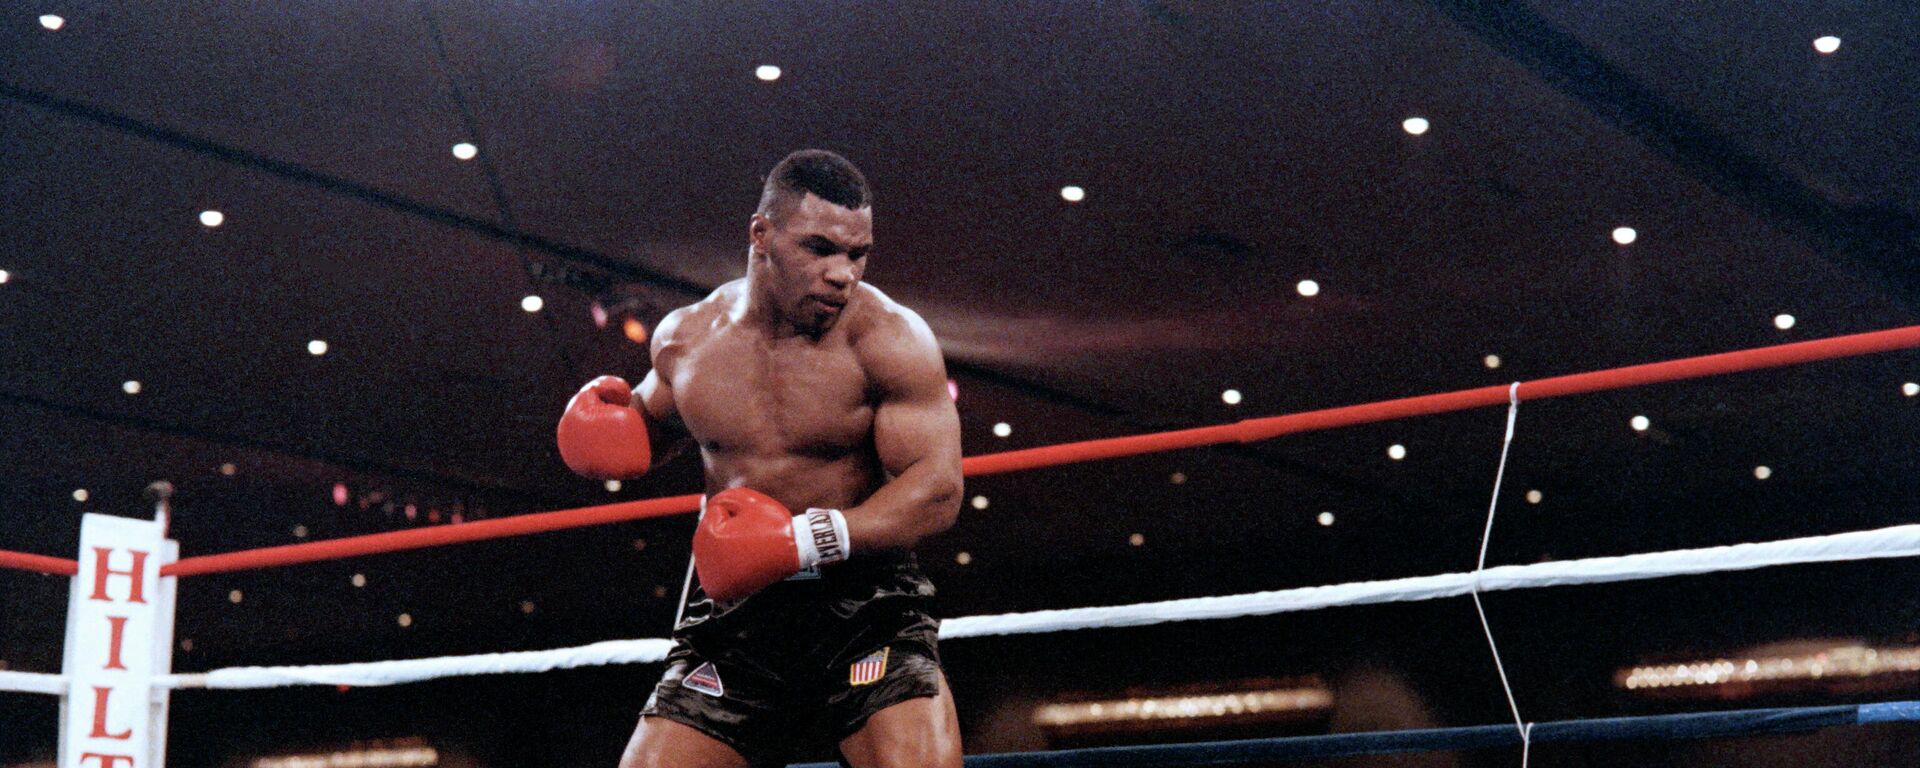 Mike Tyson (L) fights against heavyweight champion Trevor Berbick (R) to become the youngest heavyweight world champion in history on November 22, 1986 in Las Vegas. - Sputnik International, 1920, 20.11.2021